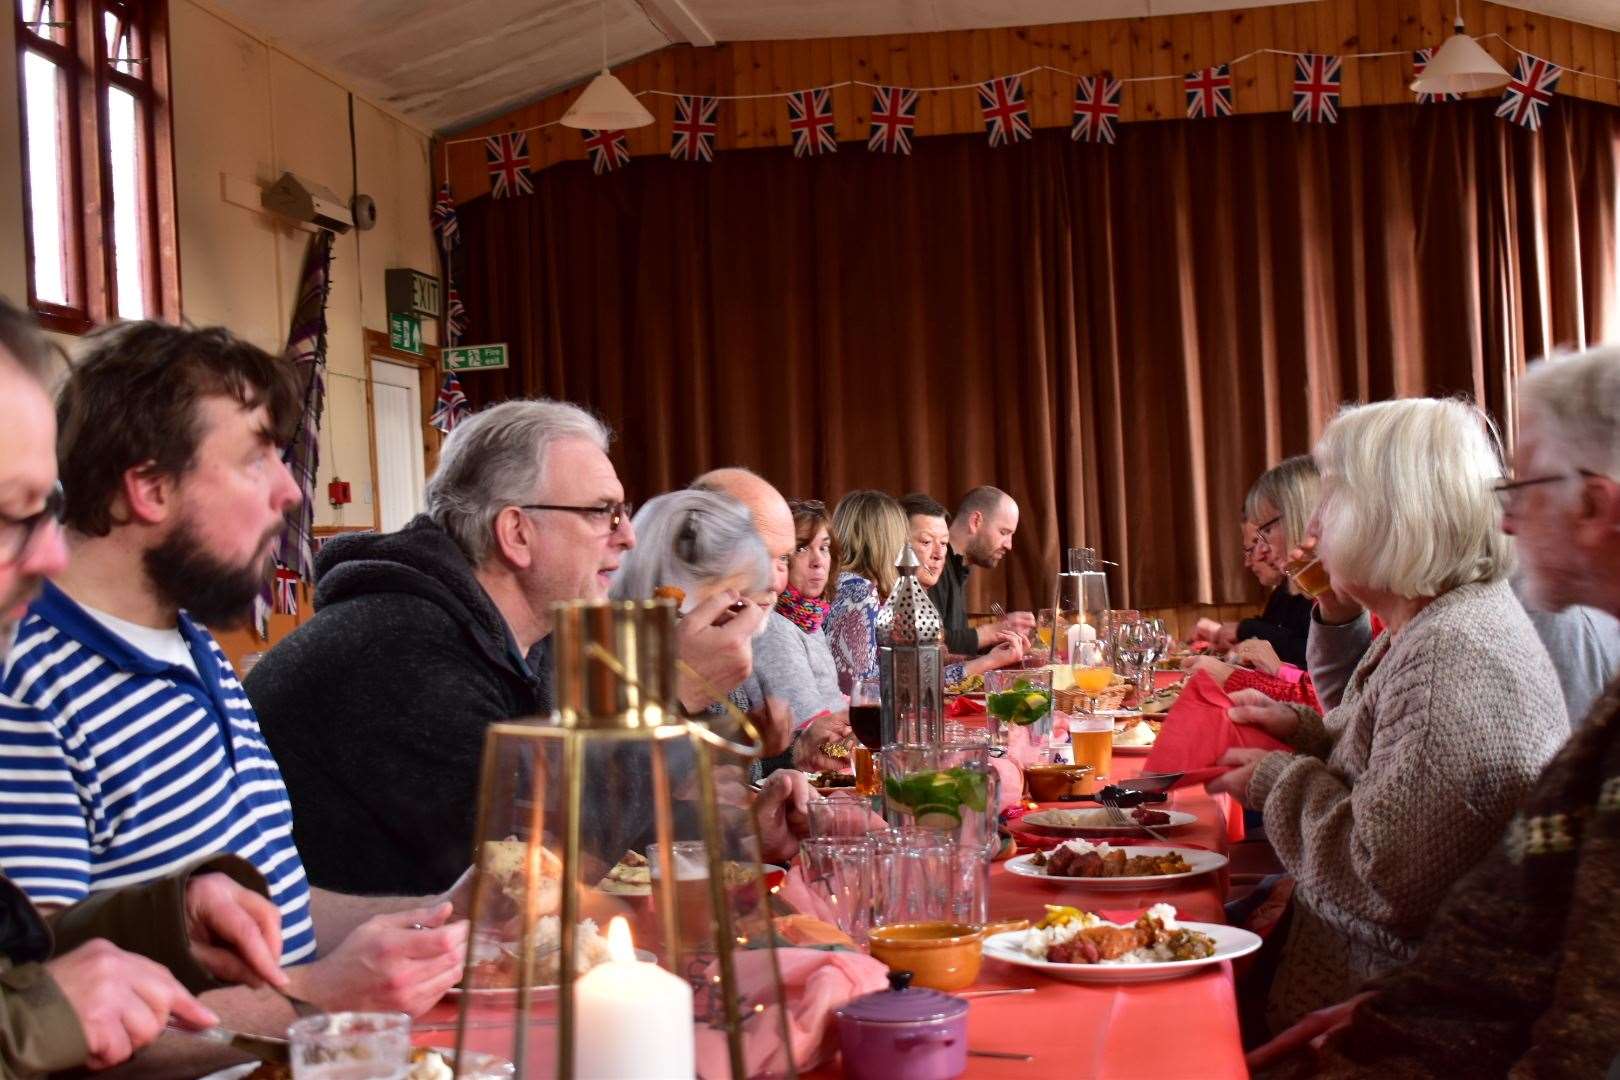 A curry lunch at Culrain Hall went down a treat with diners.